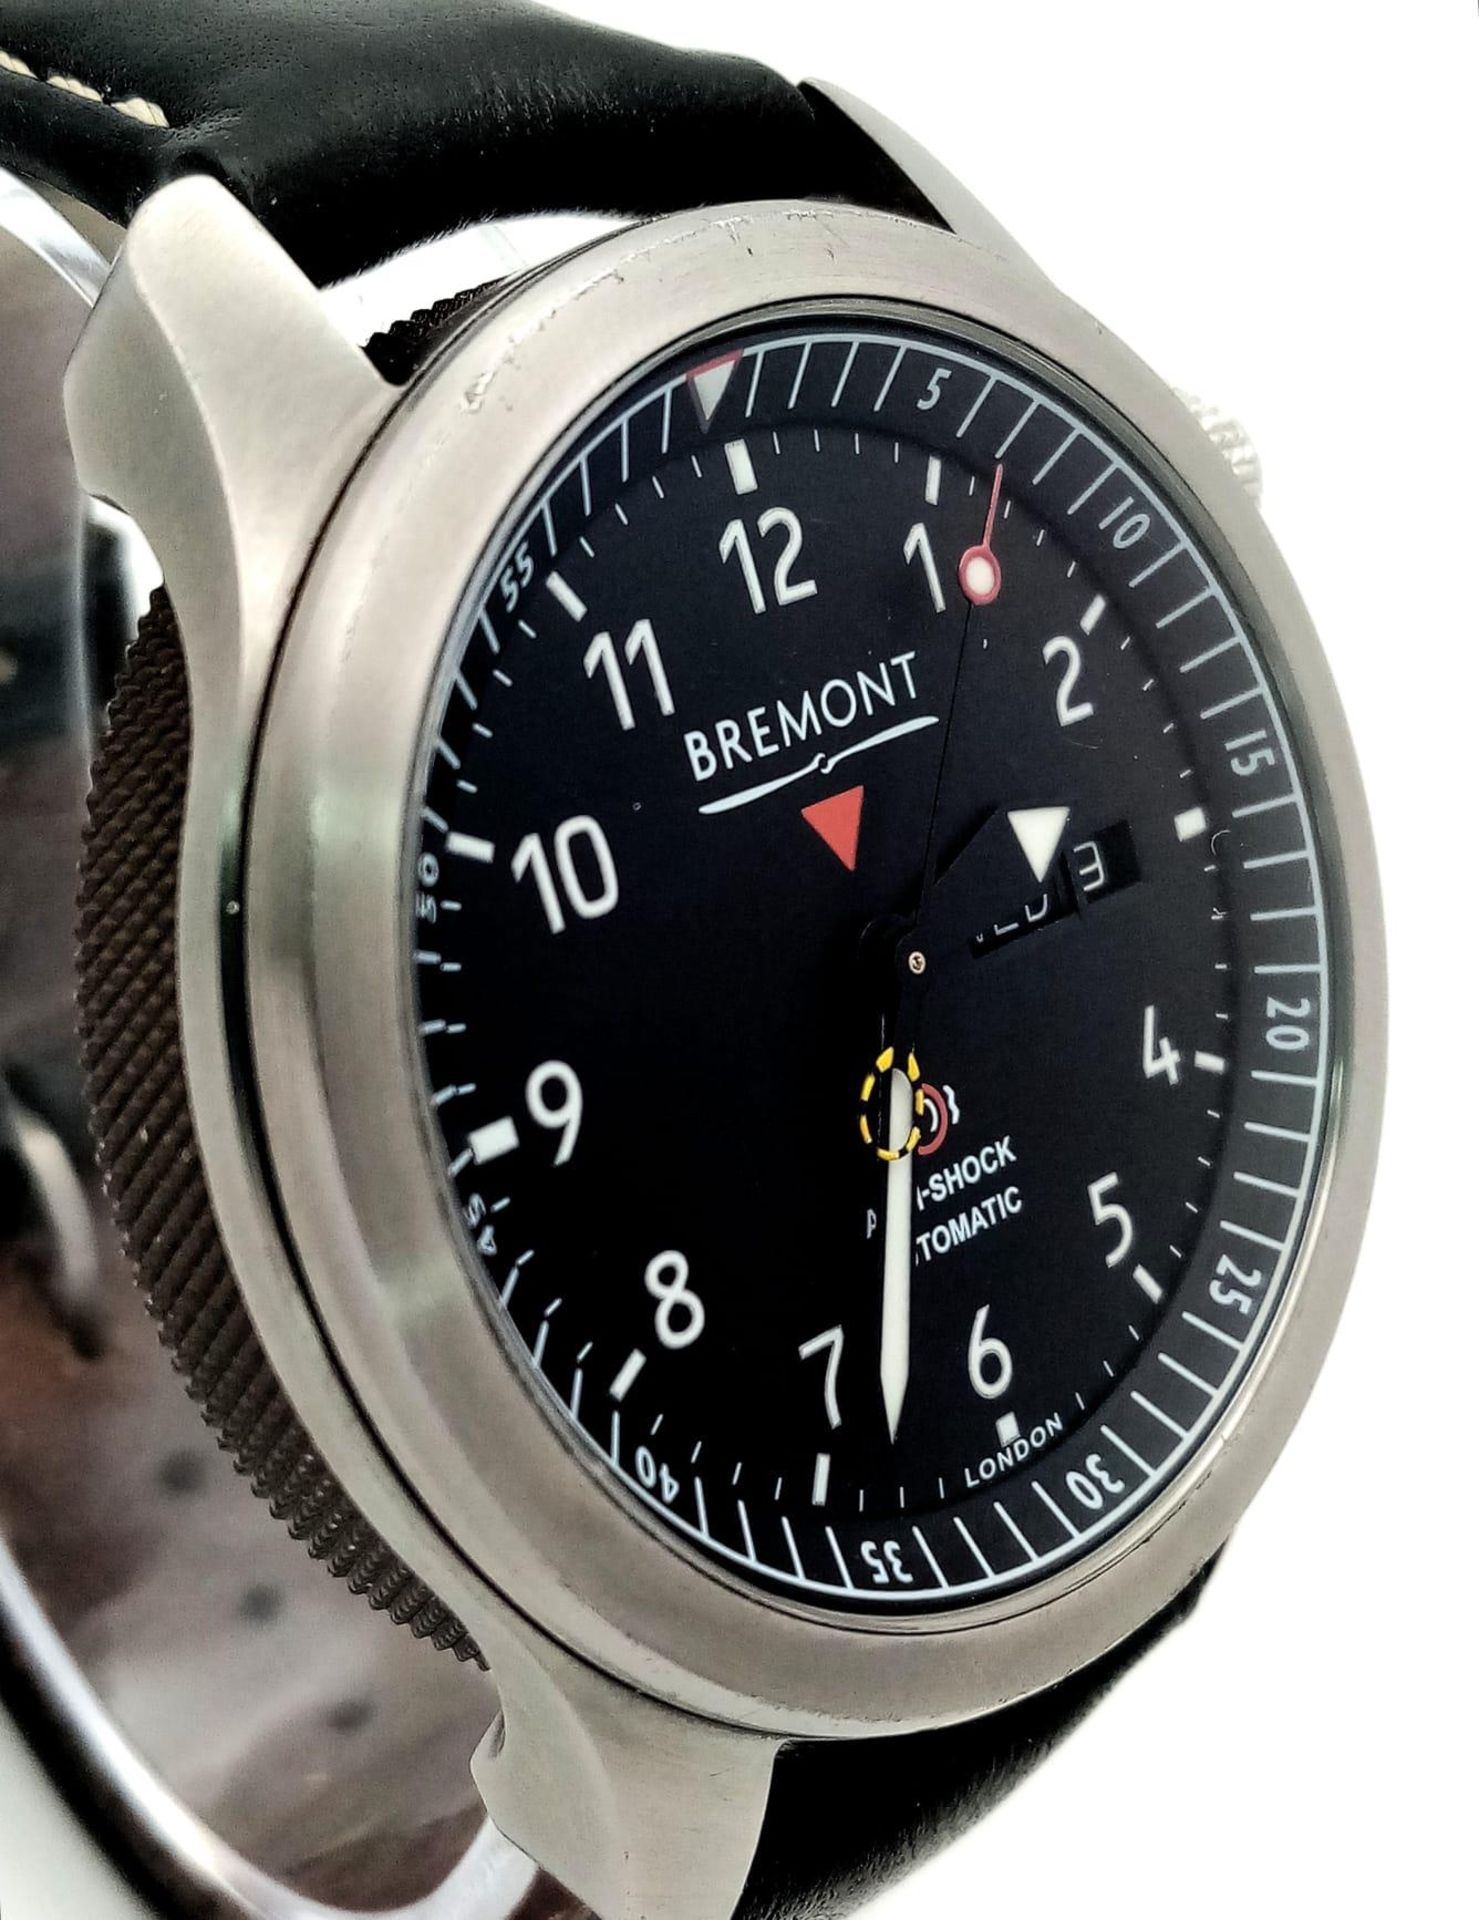 A STYLISH "BREMONT" AUTOMATIC CHONOMETER WITH ORIGINAL BOX AND RECEIPT ALSO COMES WITH WATCH - Image 3 of 10